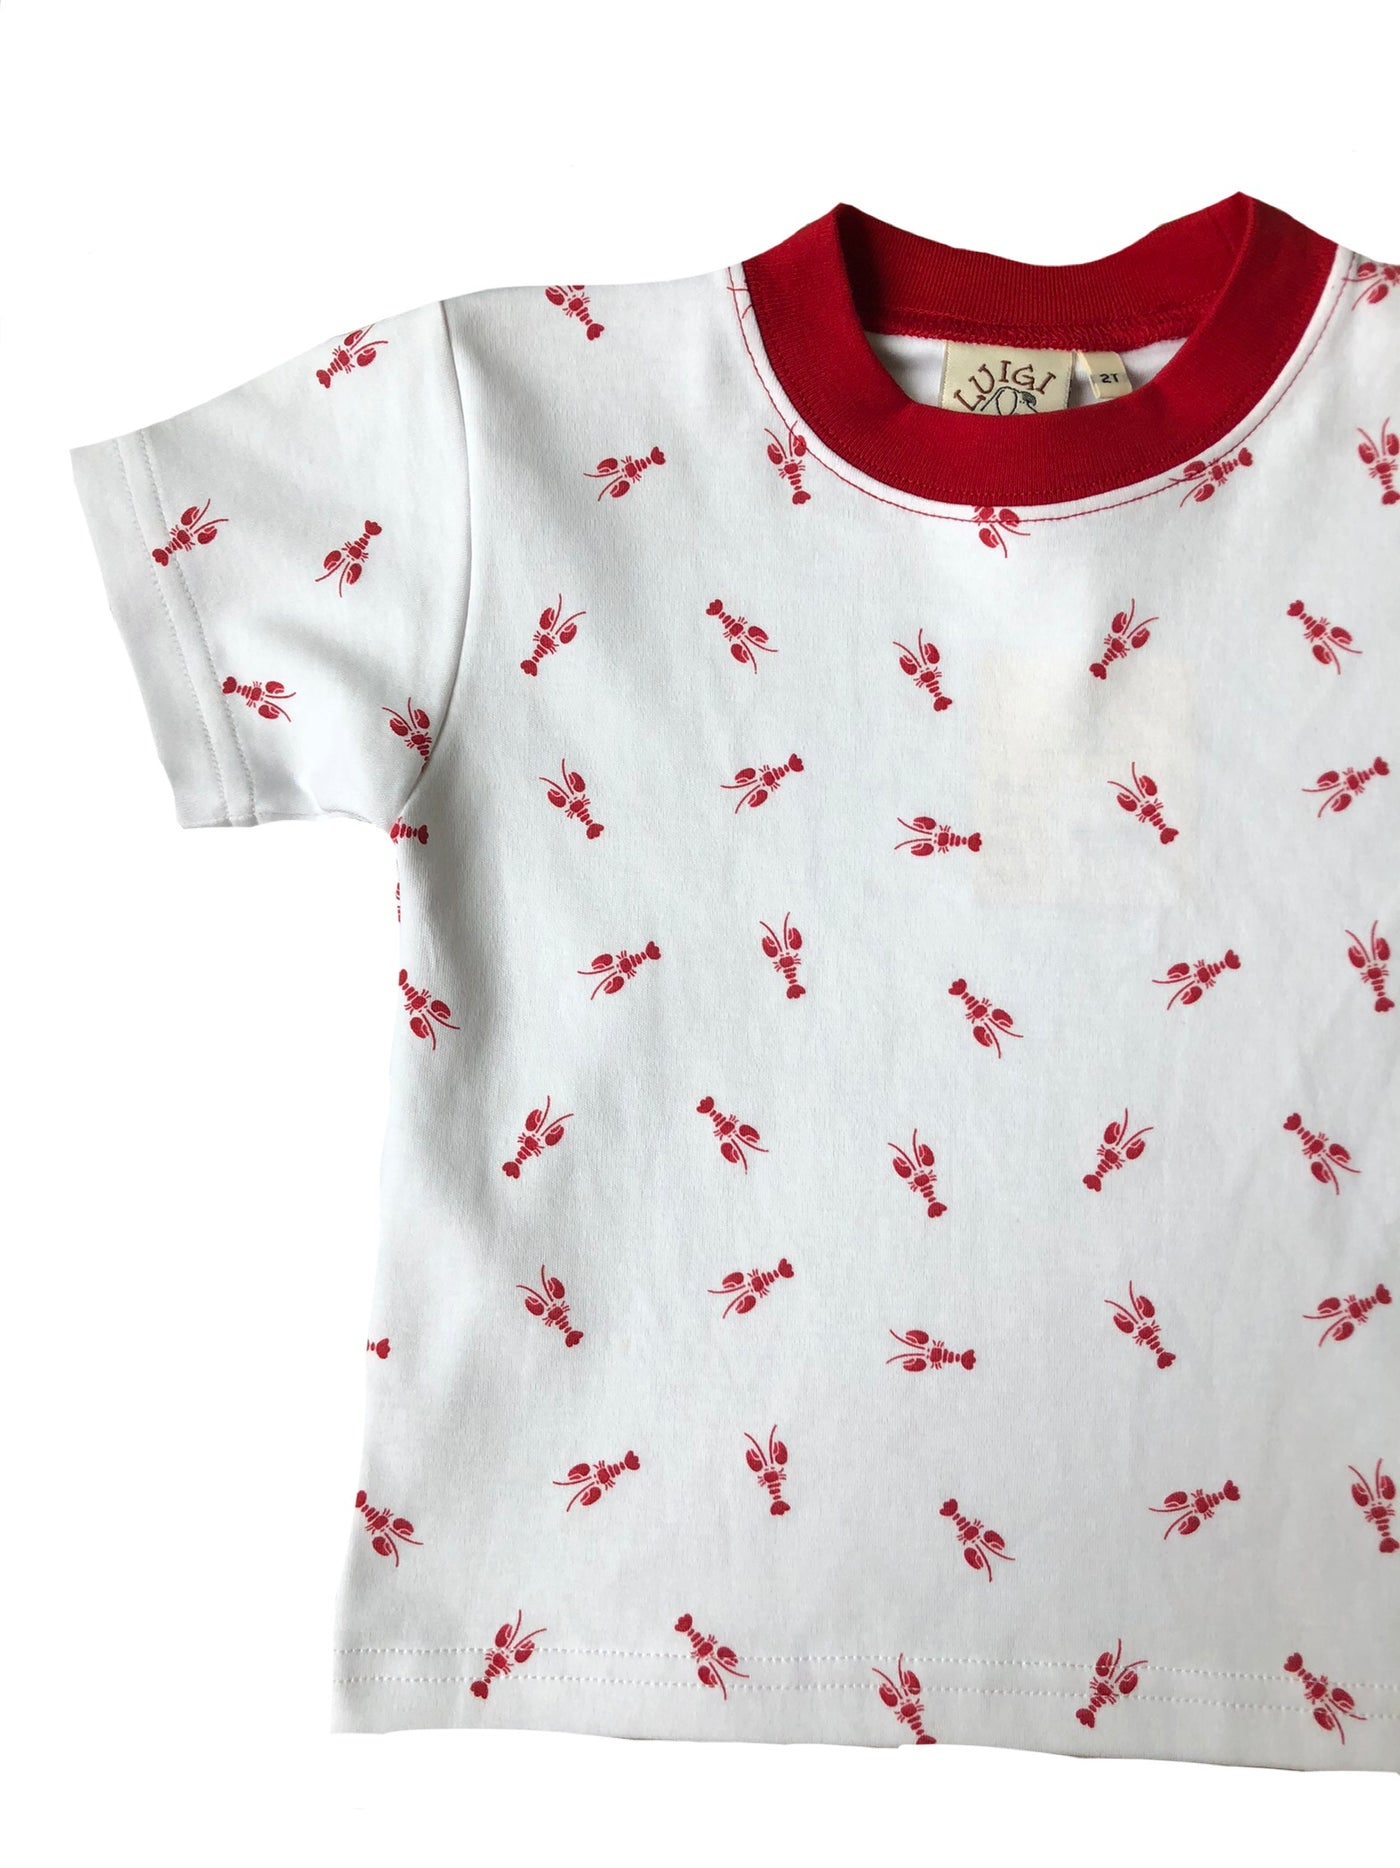 Red and White Lobster Print Tee